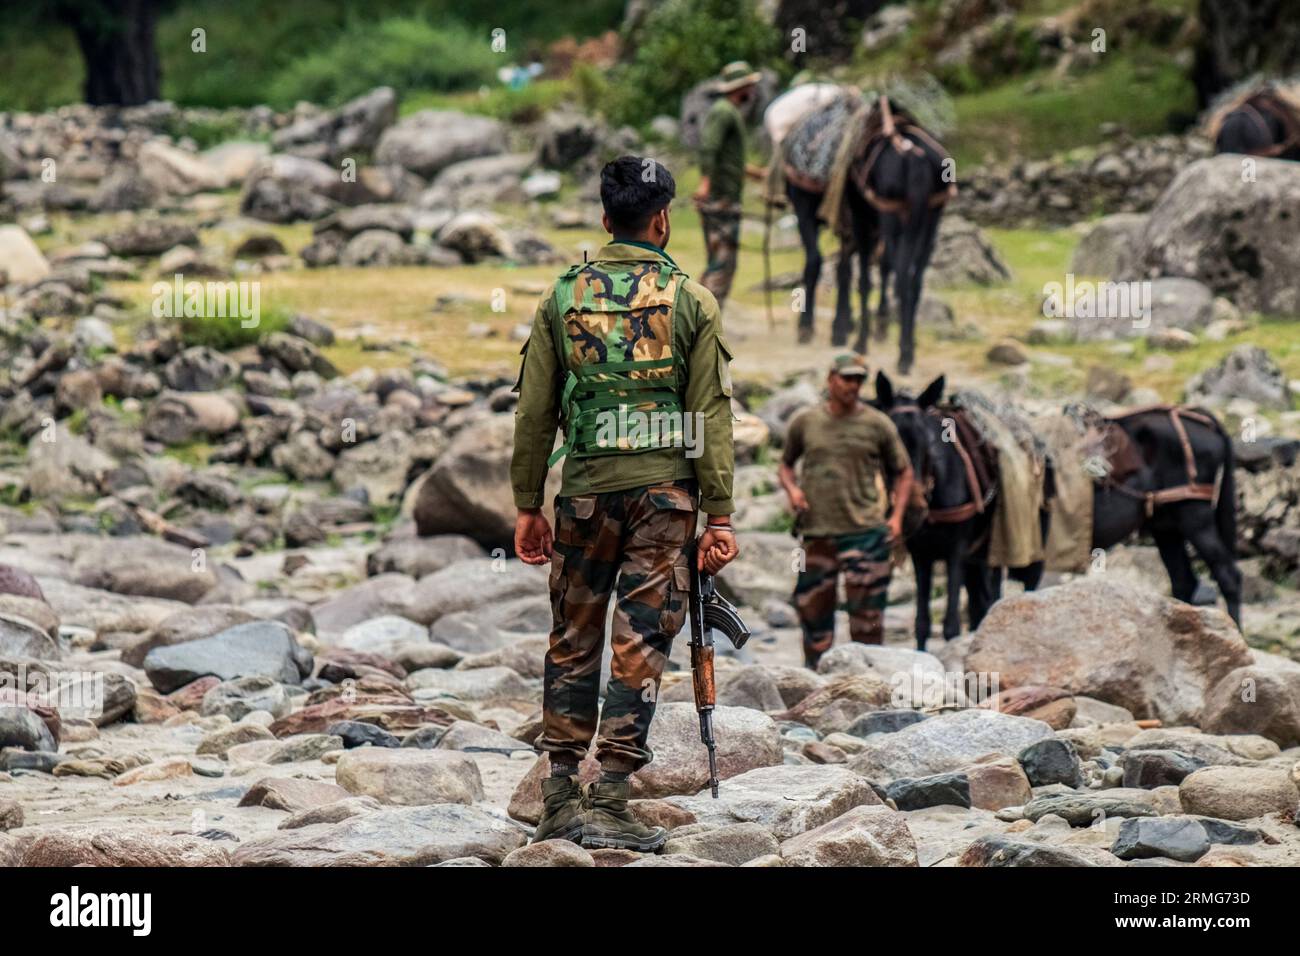 Indian army soldier stands guard as other colleagues seen with their horses as they prepare to head towards their bunkers, at Neelam river or Kishan Ganga that has divided Kashmir into two parts controlled by nuclear rivals India and Pakistan. The river acts as a disputed line of control and flows through a village called Keran from both sides which is located on the northern side of Indian Kashmir's Border district Kupwara some 150kms from Srinagar and 93kms from Muzaffarabad, in the Pakistan side of Kashmir. (Photo by Faisal Bashir/SOPA Images/Sipa USA) Stock Photo